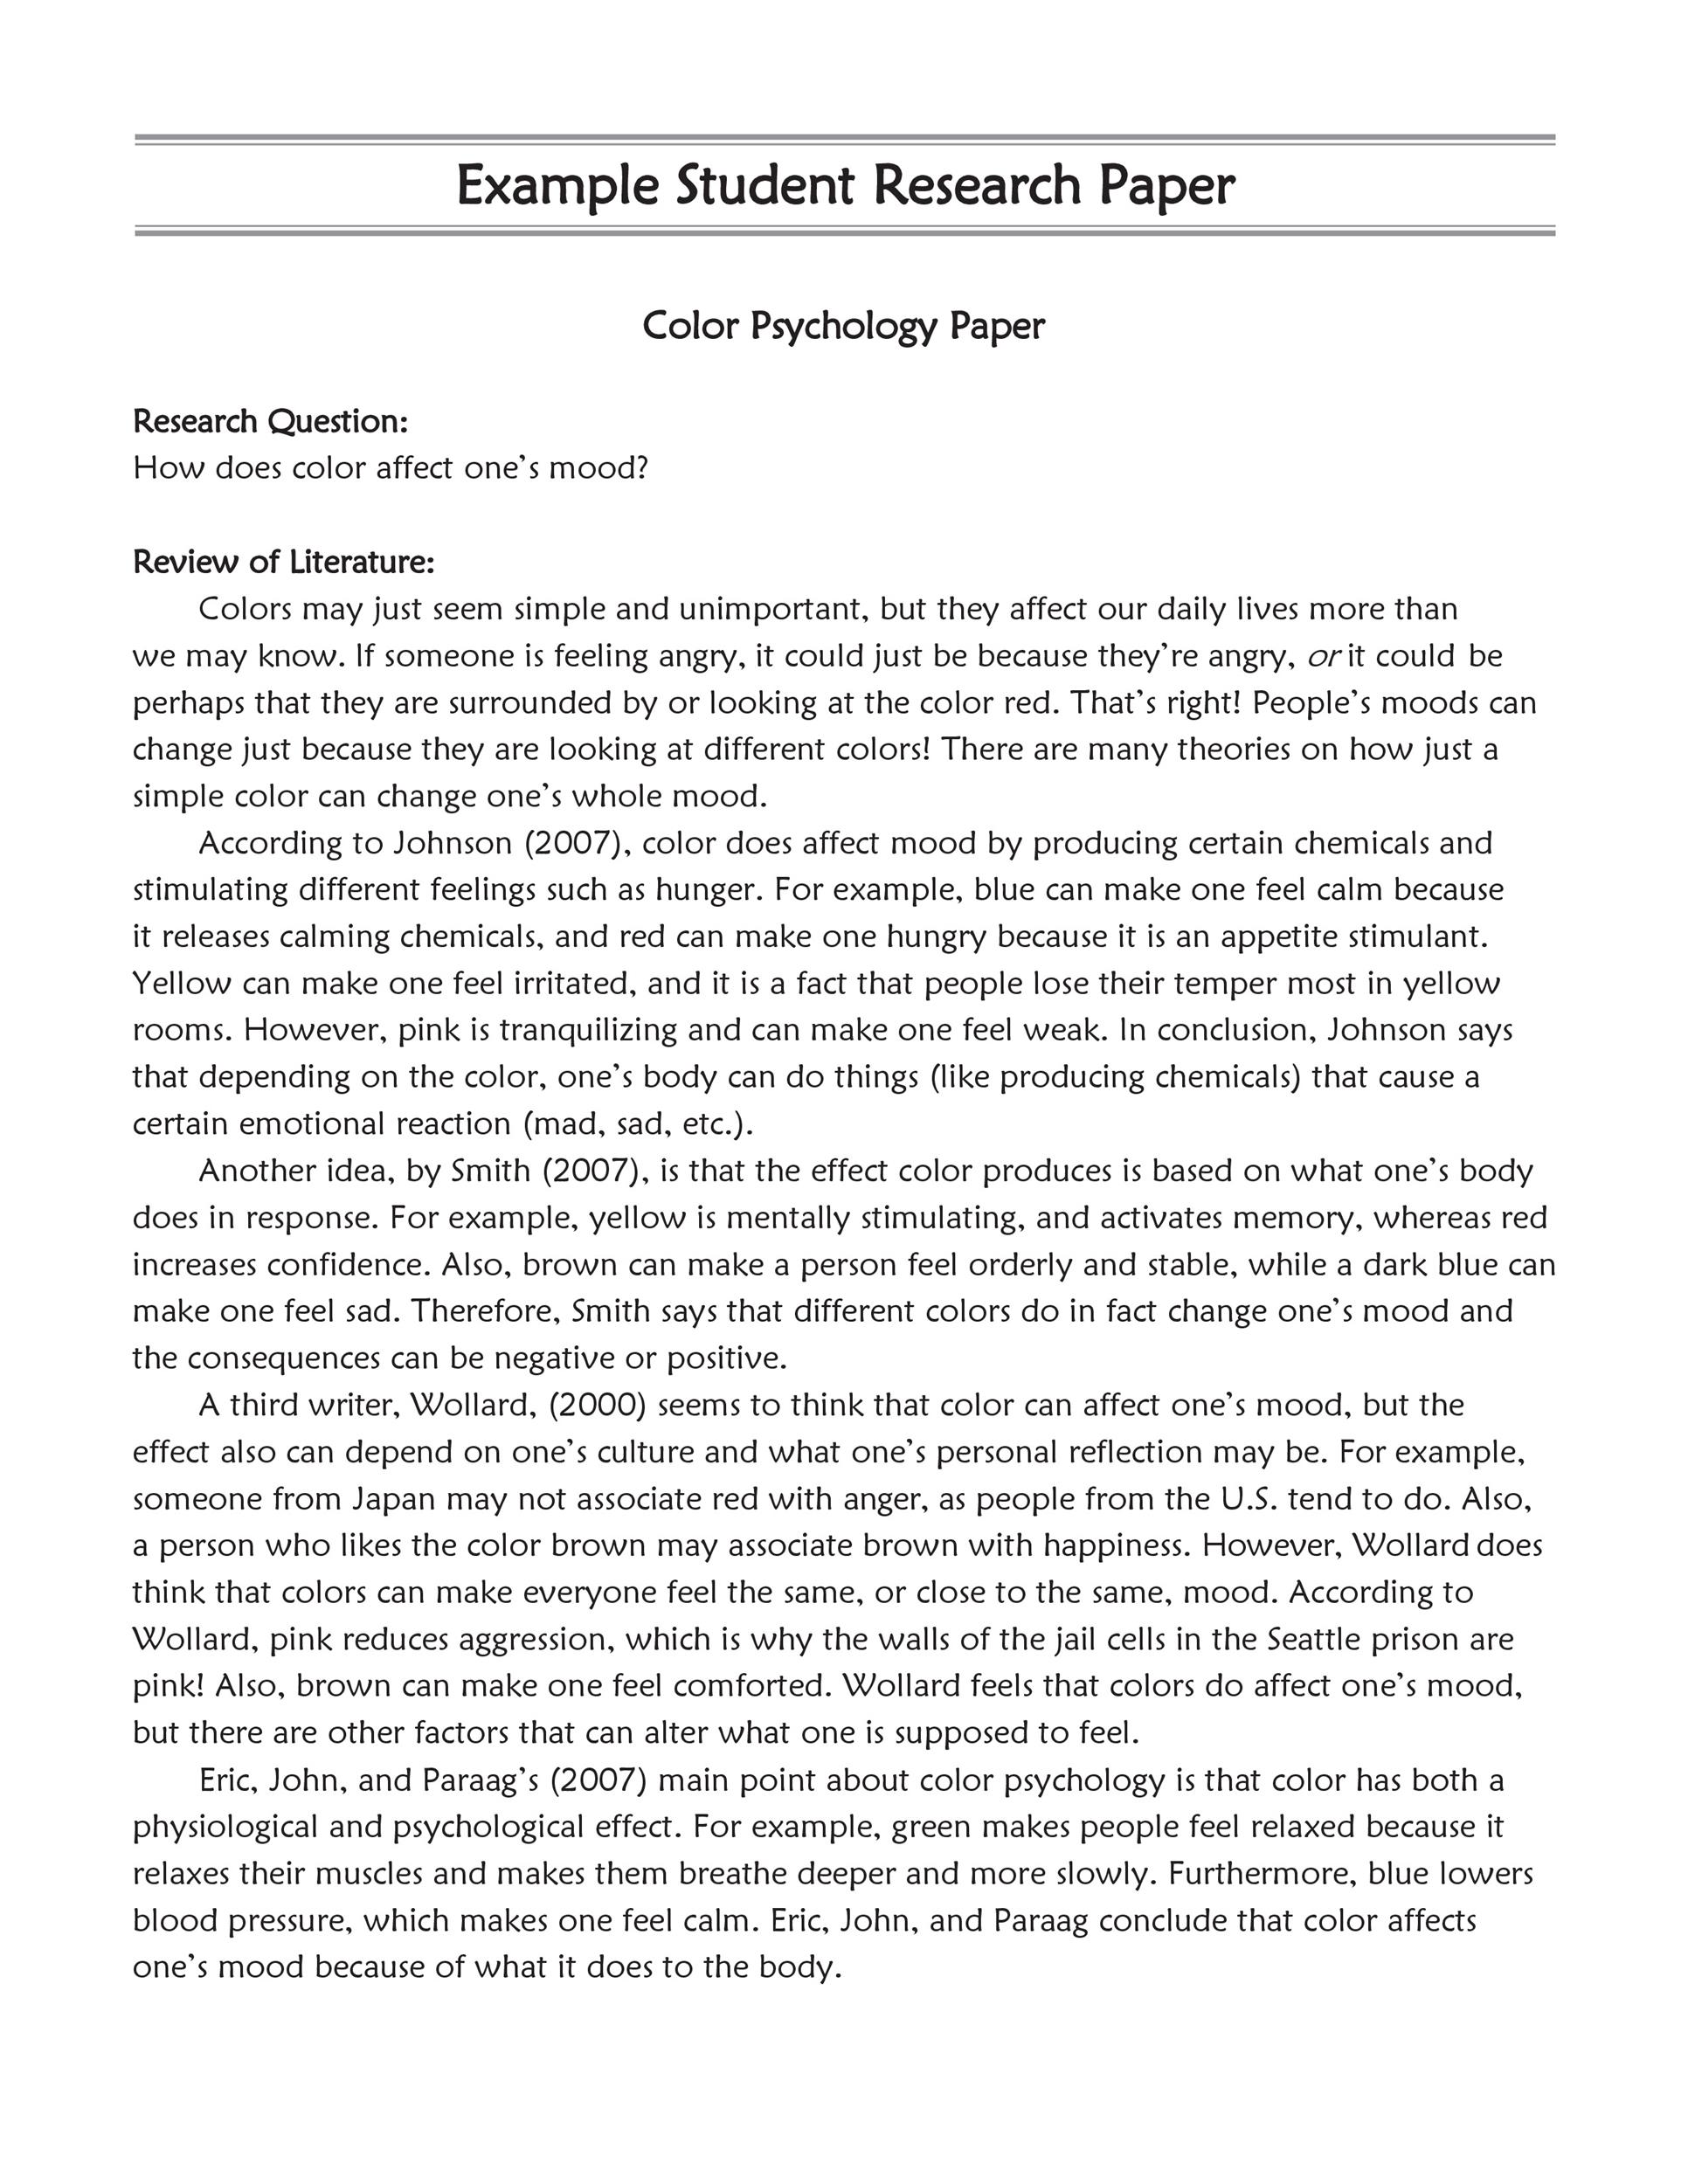 Draft for research paper example